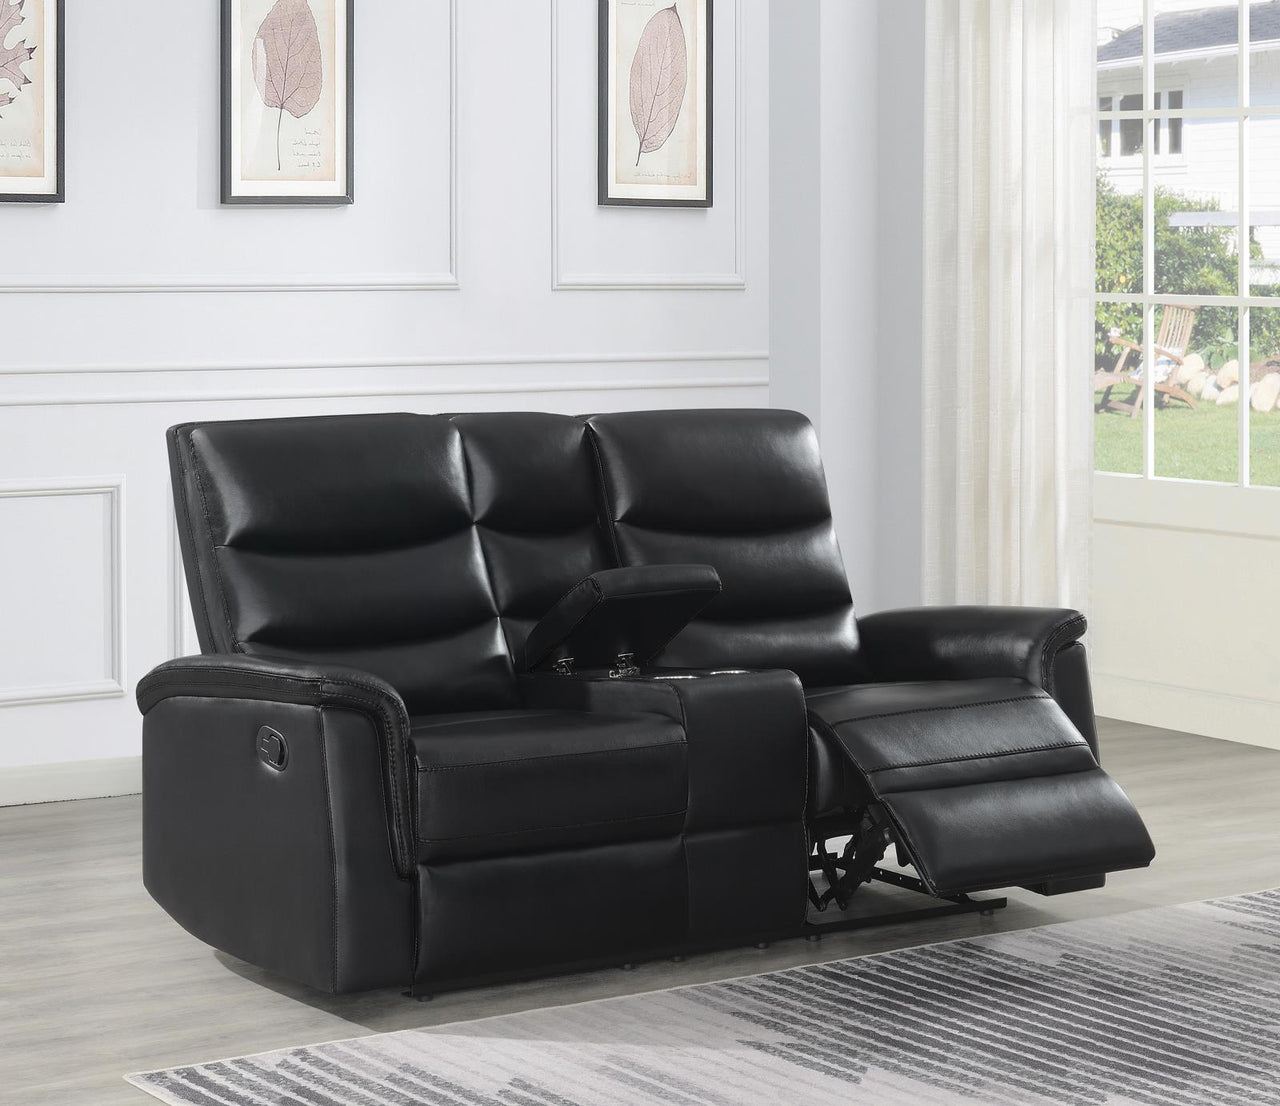 601515 MOTION LOVESEAT W/ CONSOLE image